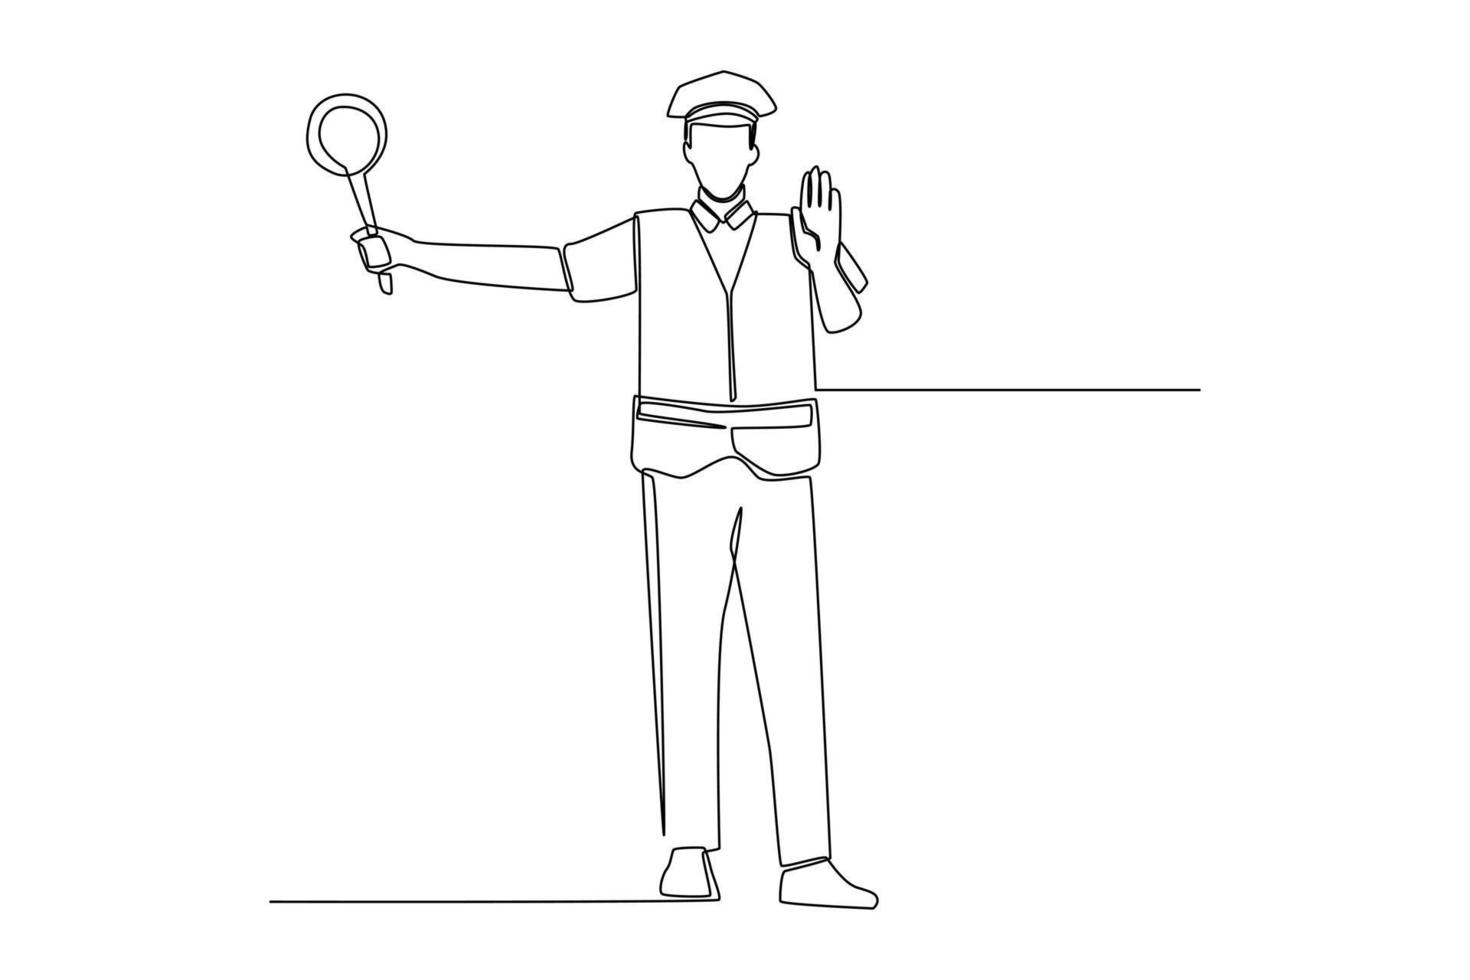 Single one line drawing Traffic Police standing and using sign board. Road and traffic concept. Continuous line draw design graphic vector illustration.